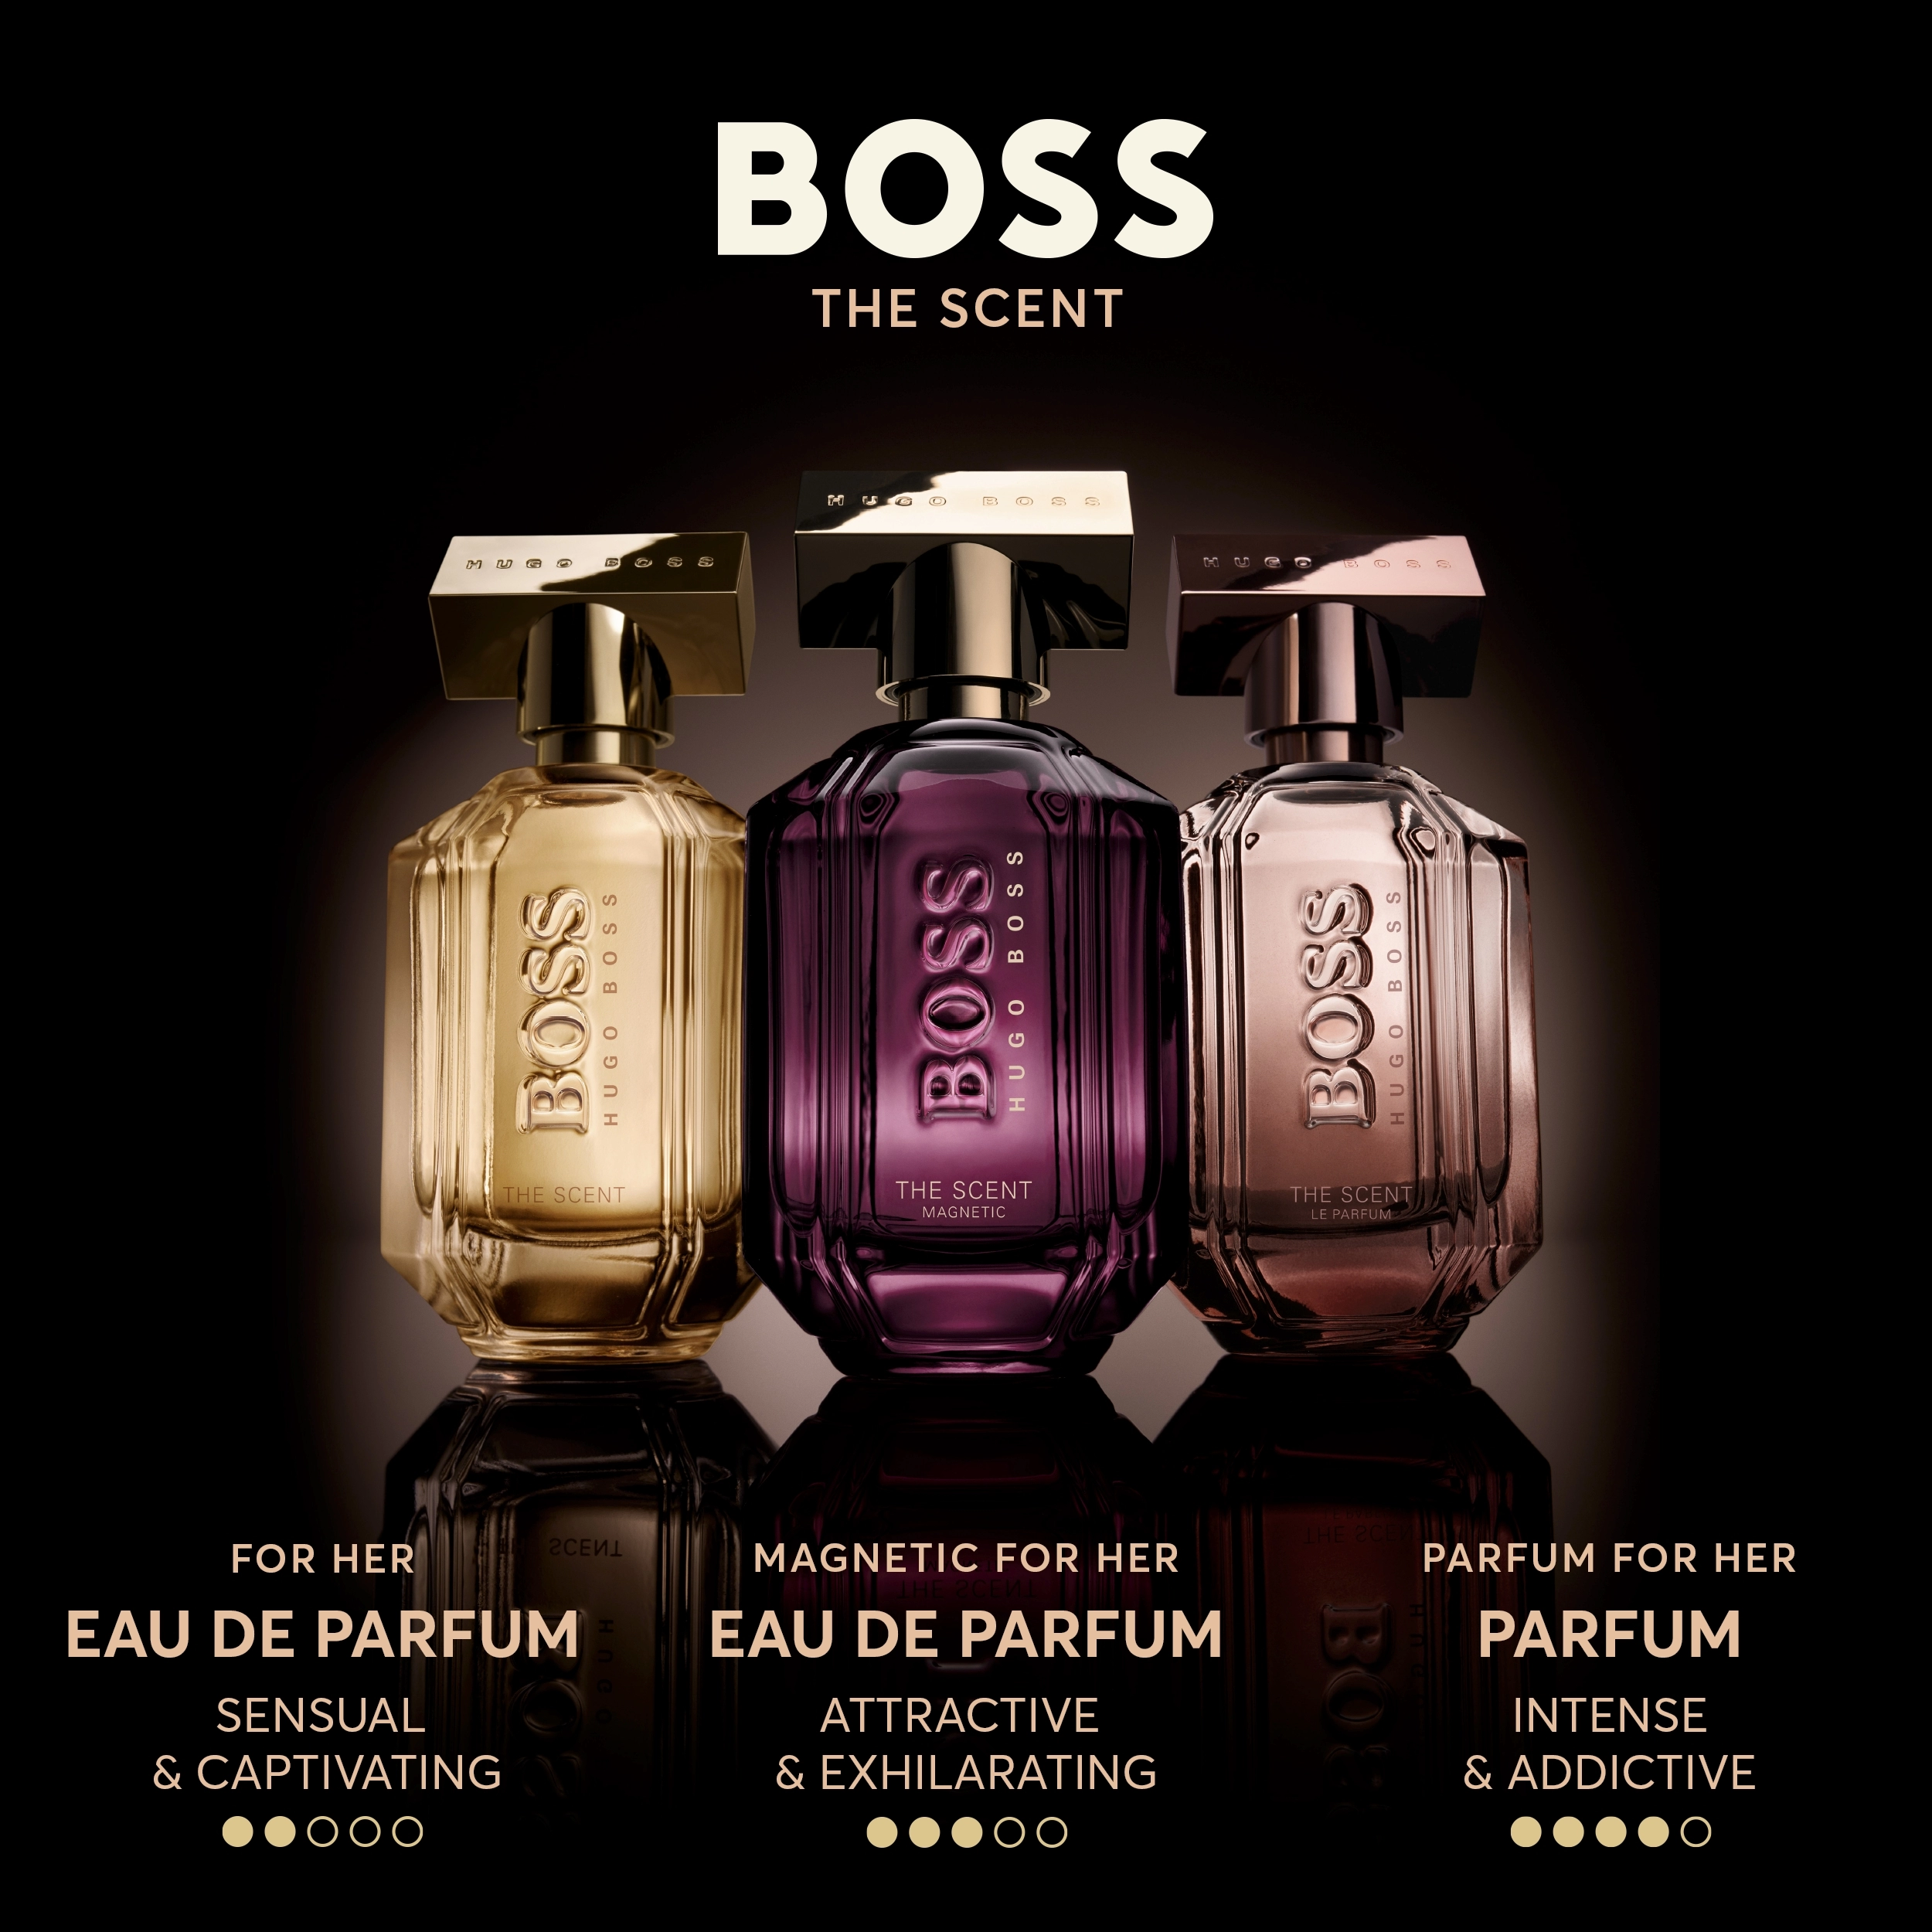 HBO_SCENT_MAGN_W_SCENT_W_SCENT_LE_PARF_W_23_Ecom_Visual_Collection_2500x2500.psd-JPG-150dpi